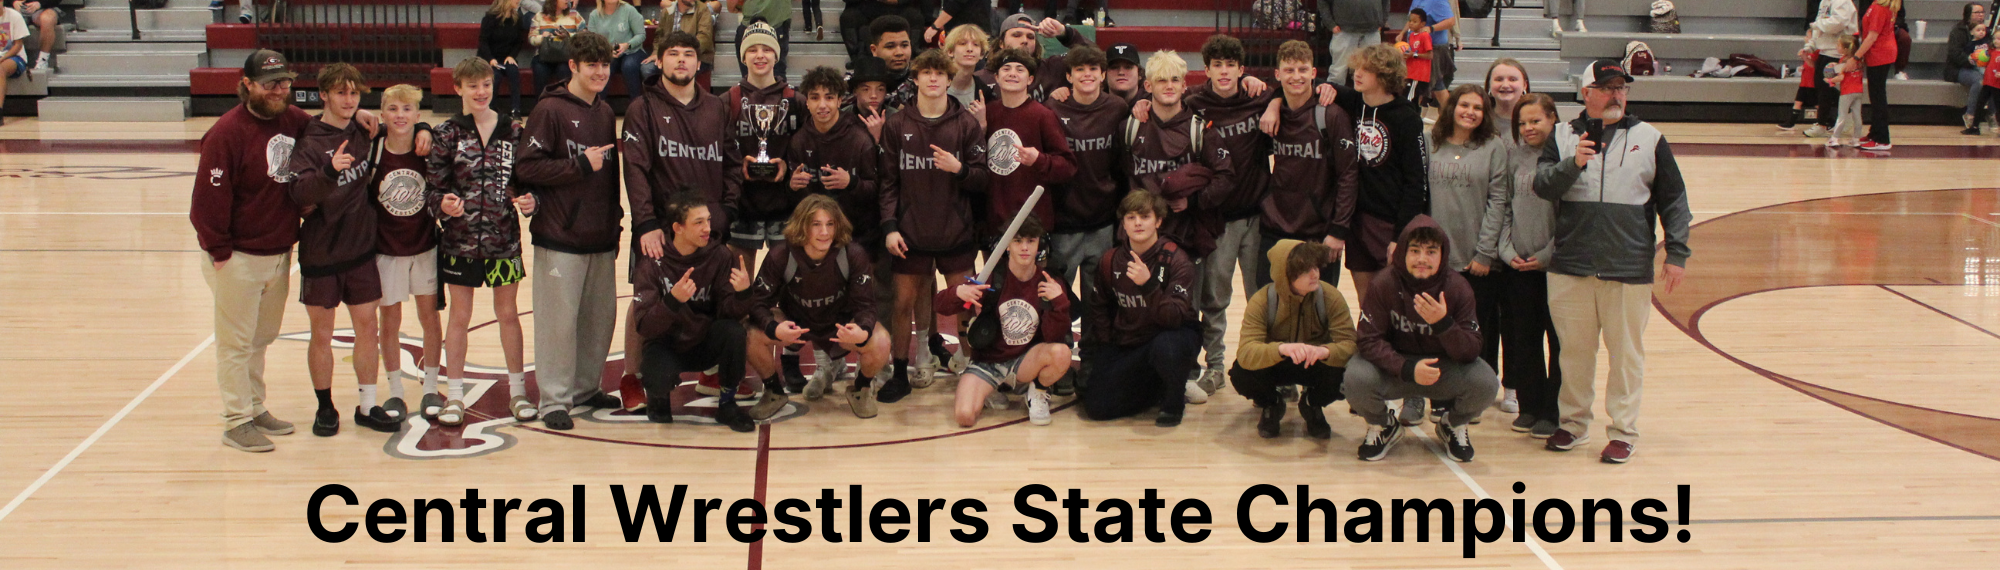 Central Wrestlers State Champions